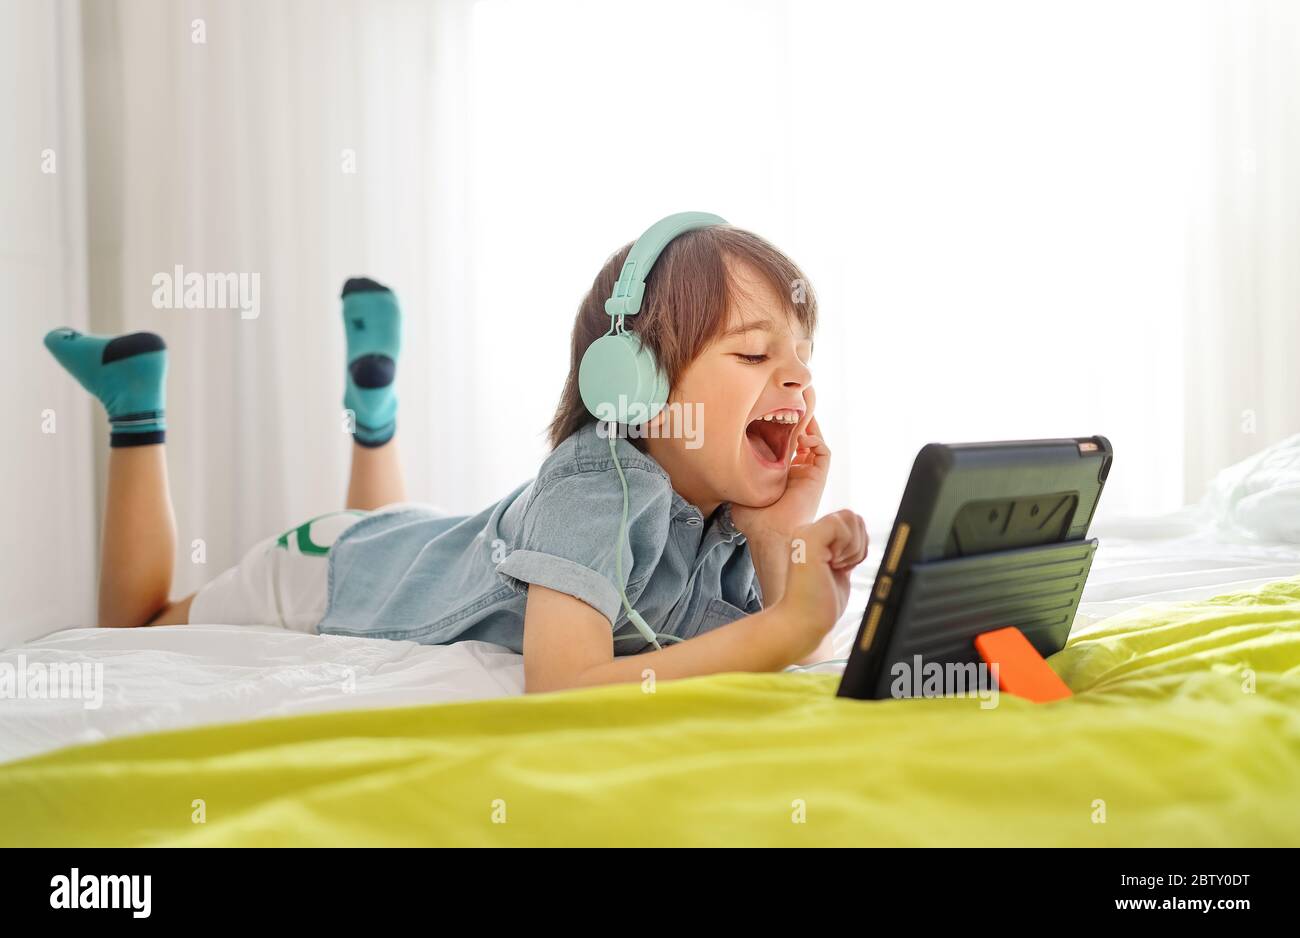 Little smiling boy sitting on bed and playing on a digital tablet at home. Kid in his bedroom wearing headphones and using smart devices having fun Stock Photo